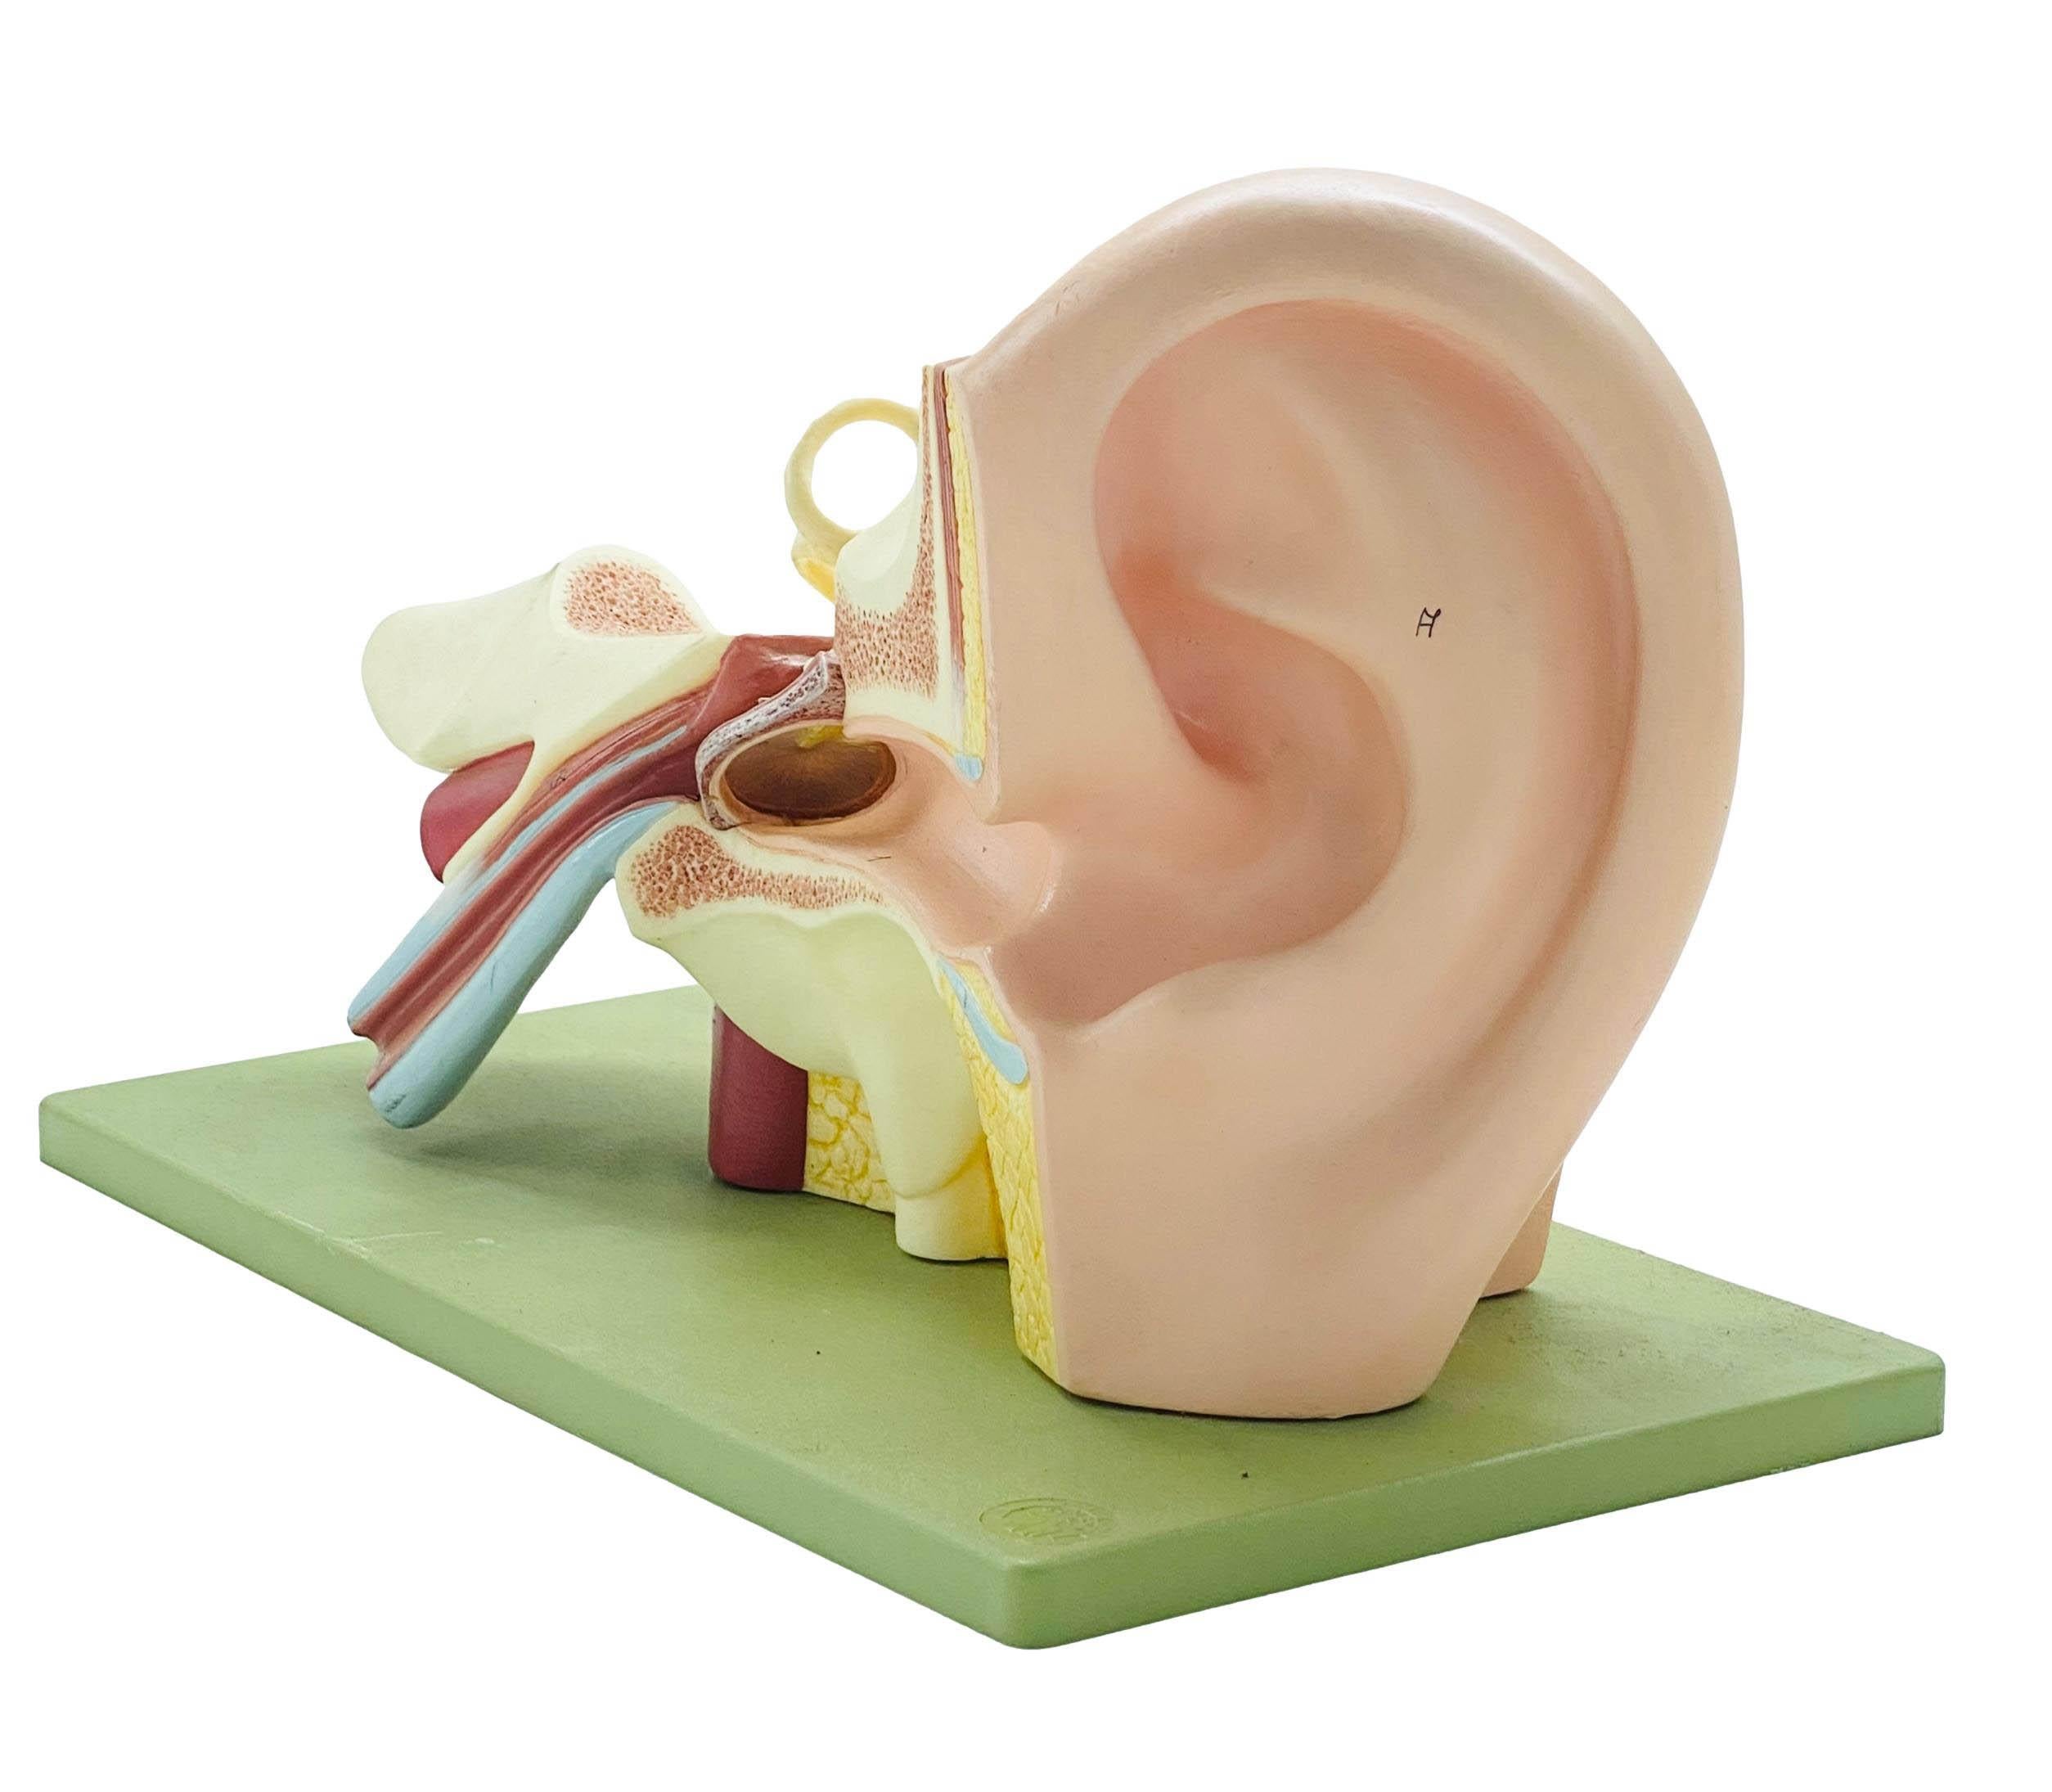 Didactic model of the human ear, materiale plastico, made in 1950s by Somso, a German company active since the second half of the nineteenth century, known as an excellence in the development of scientific models, the most useful support for the